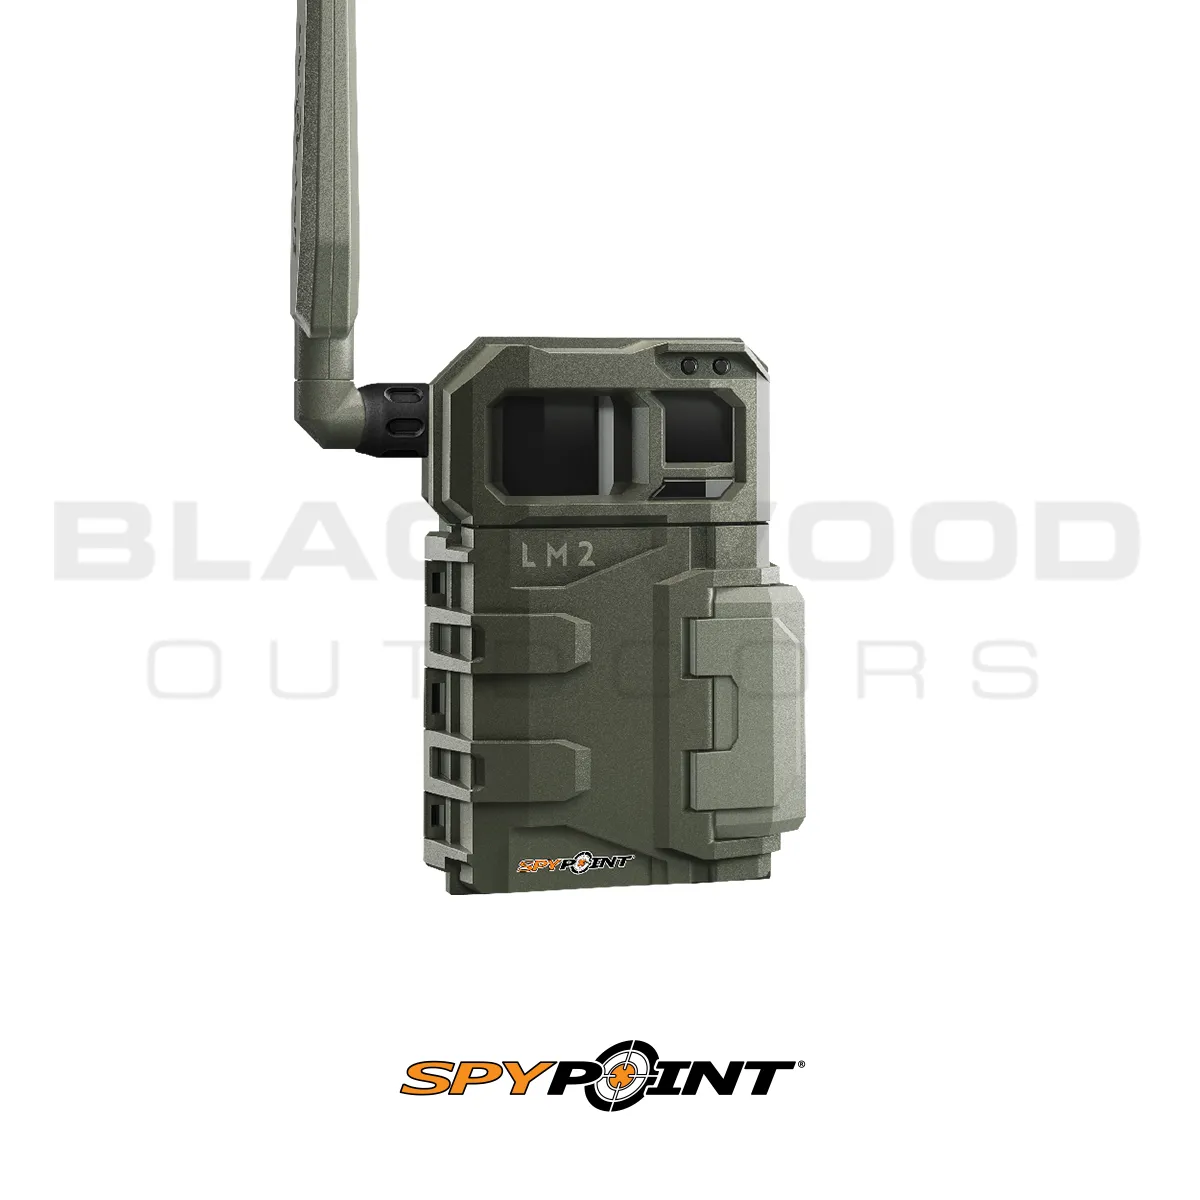 Spypoint Link Micro 2 Trail Camera